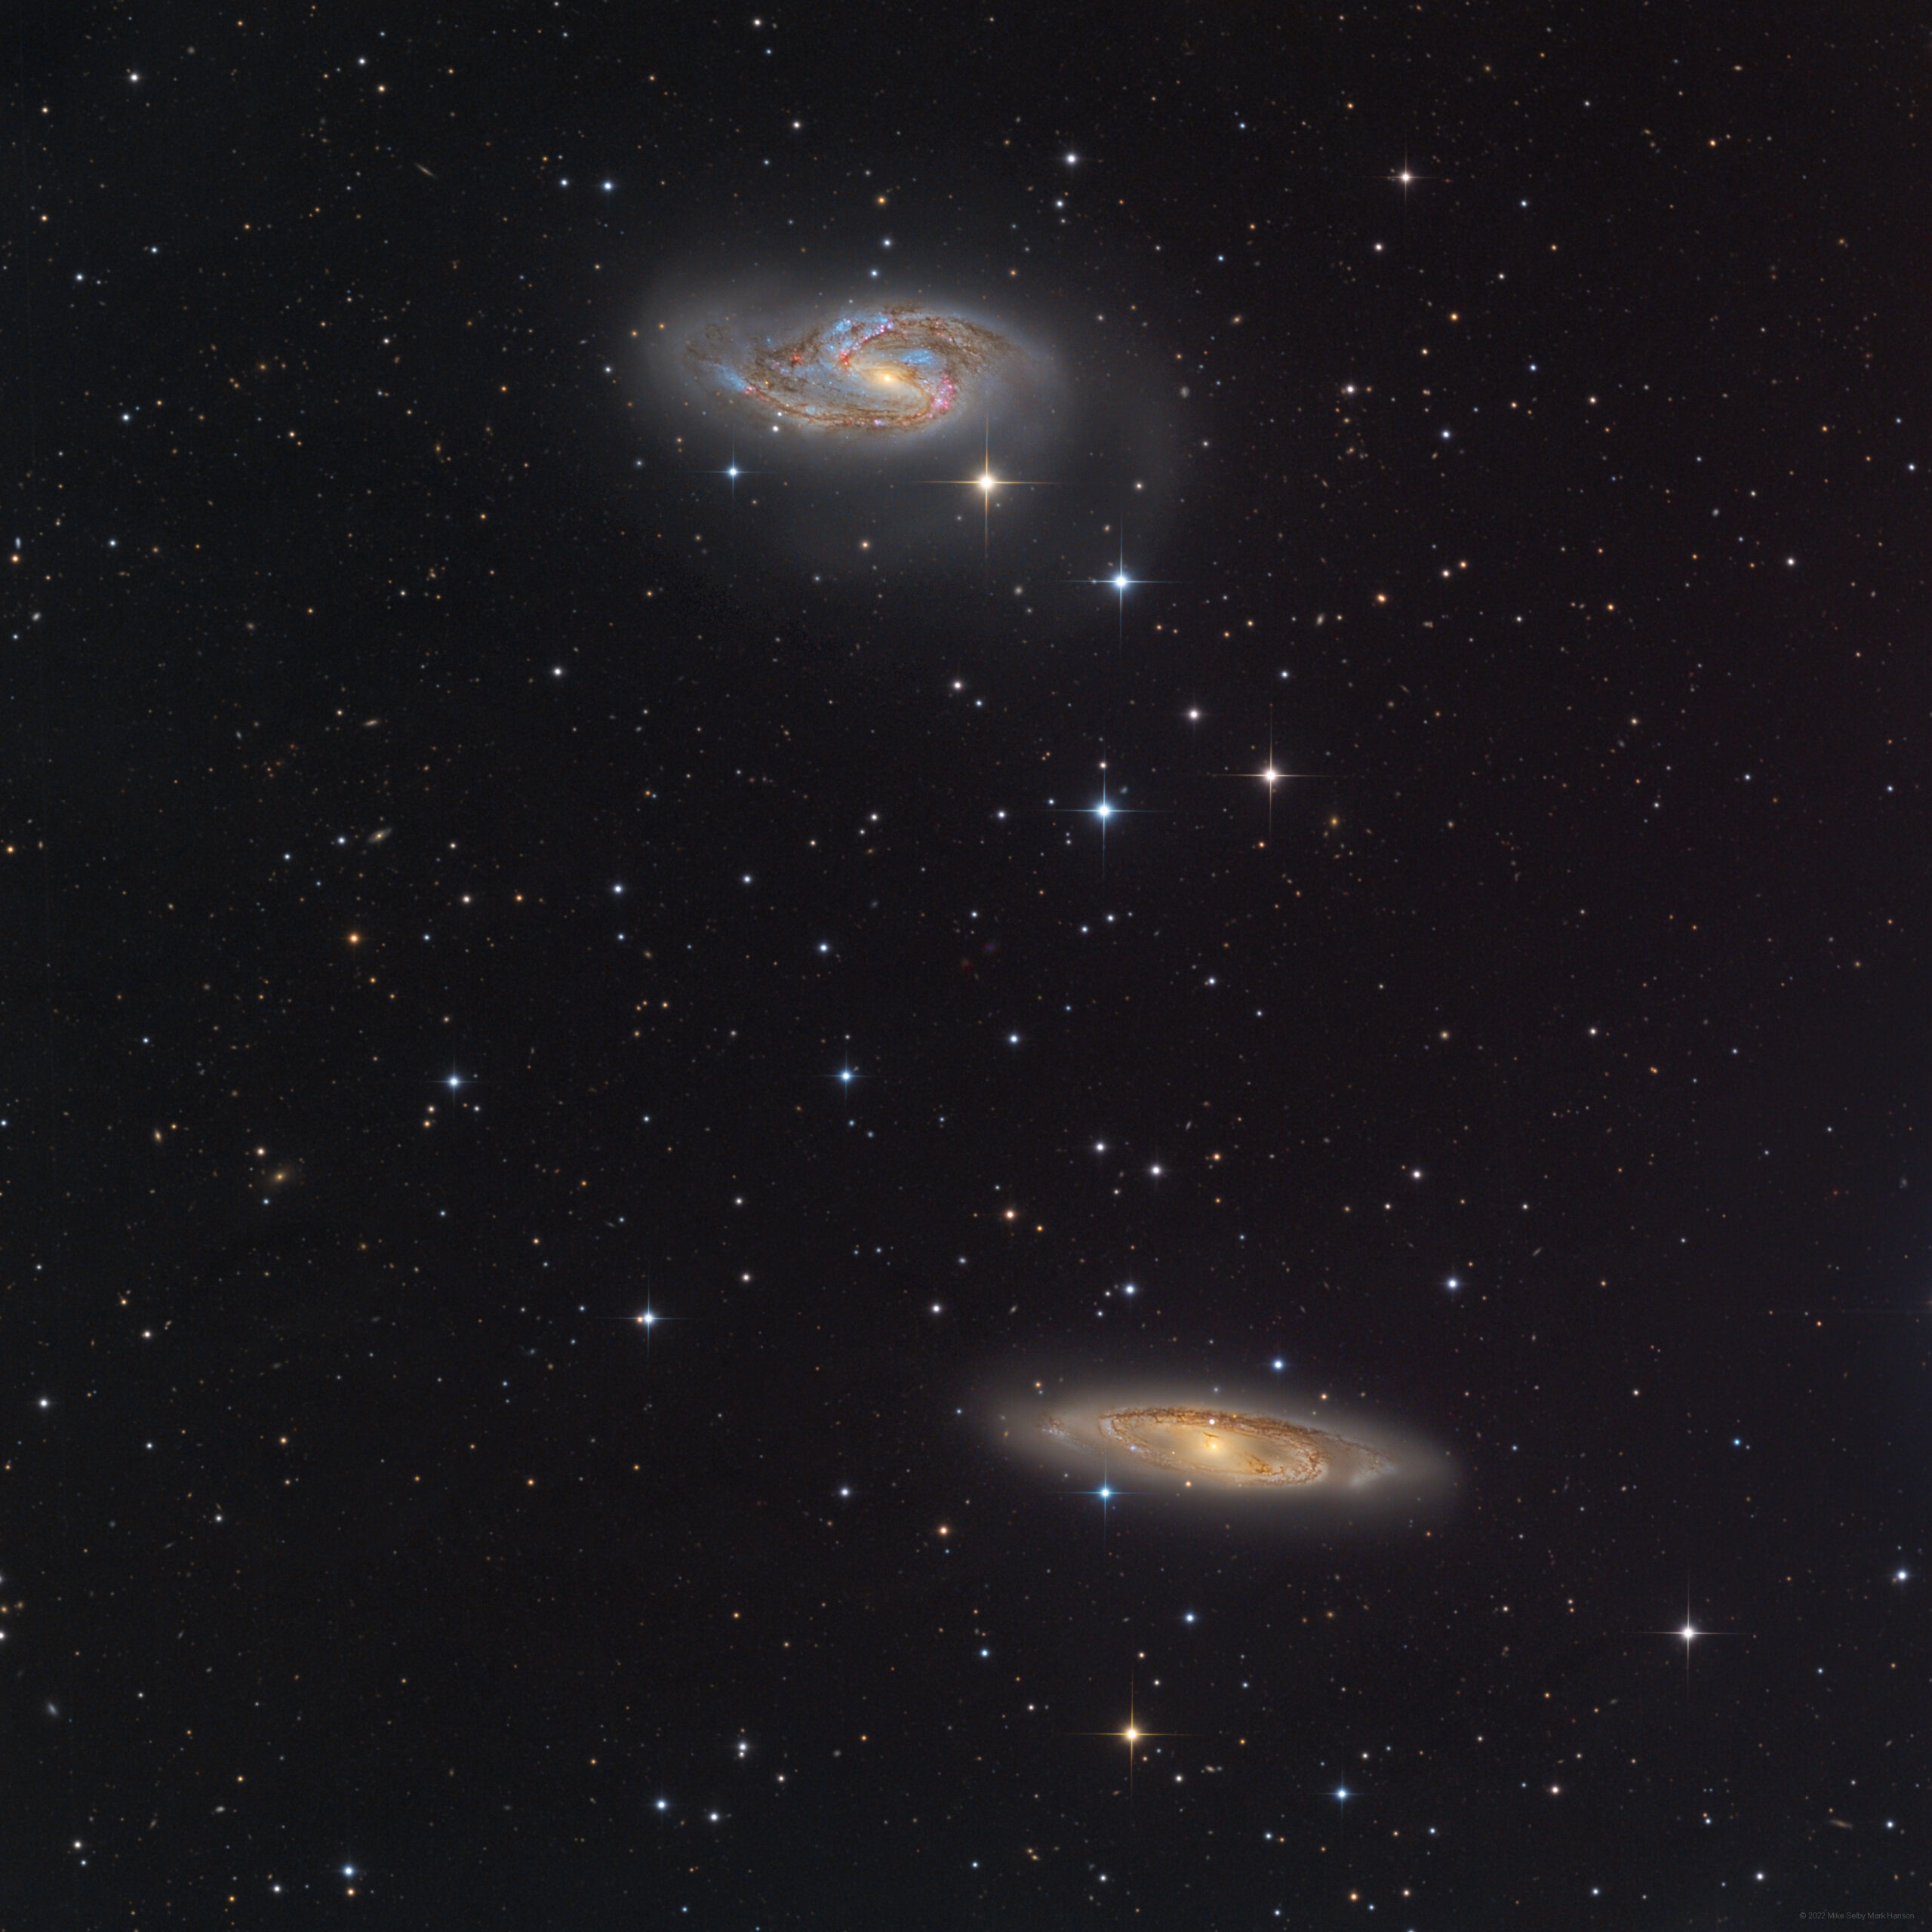 M65 and M66